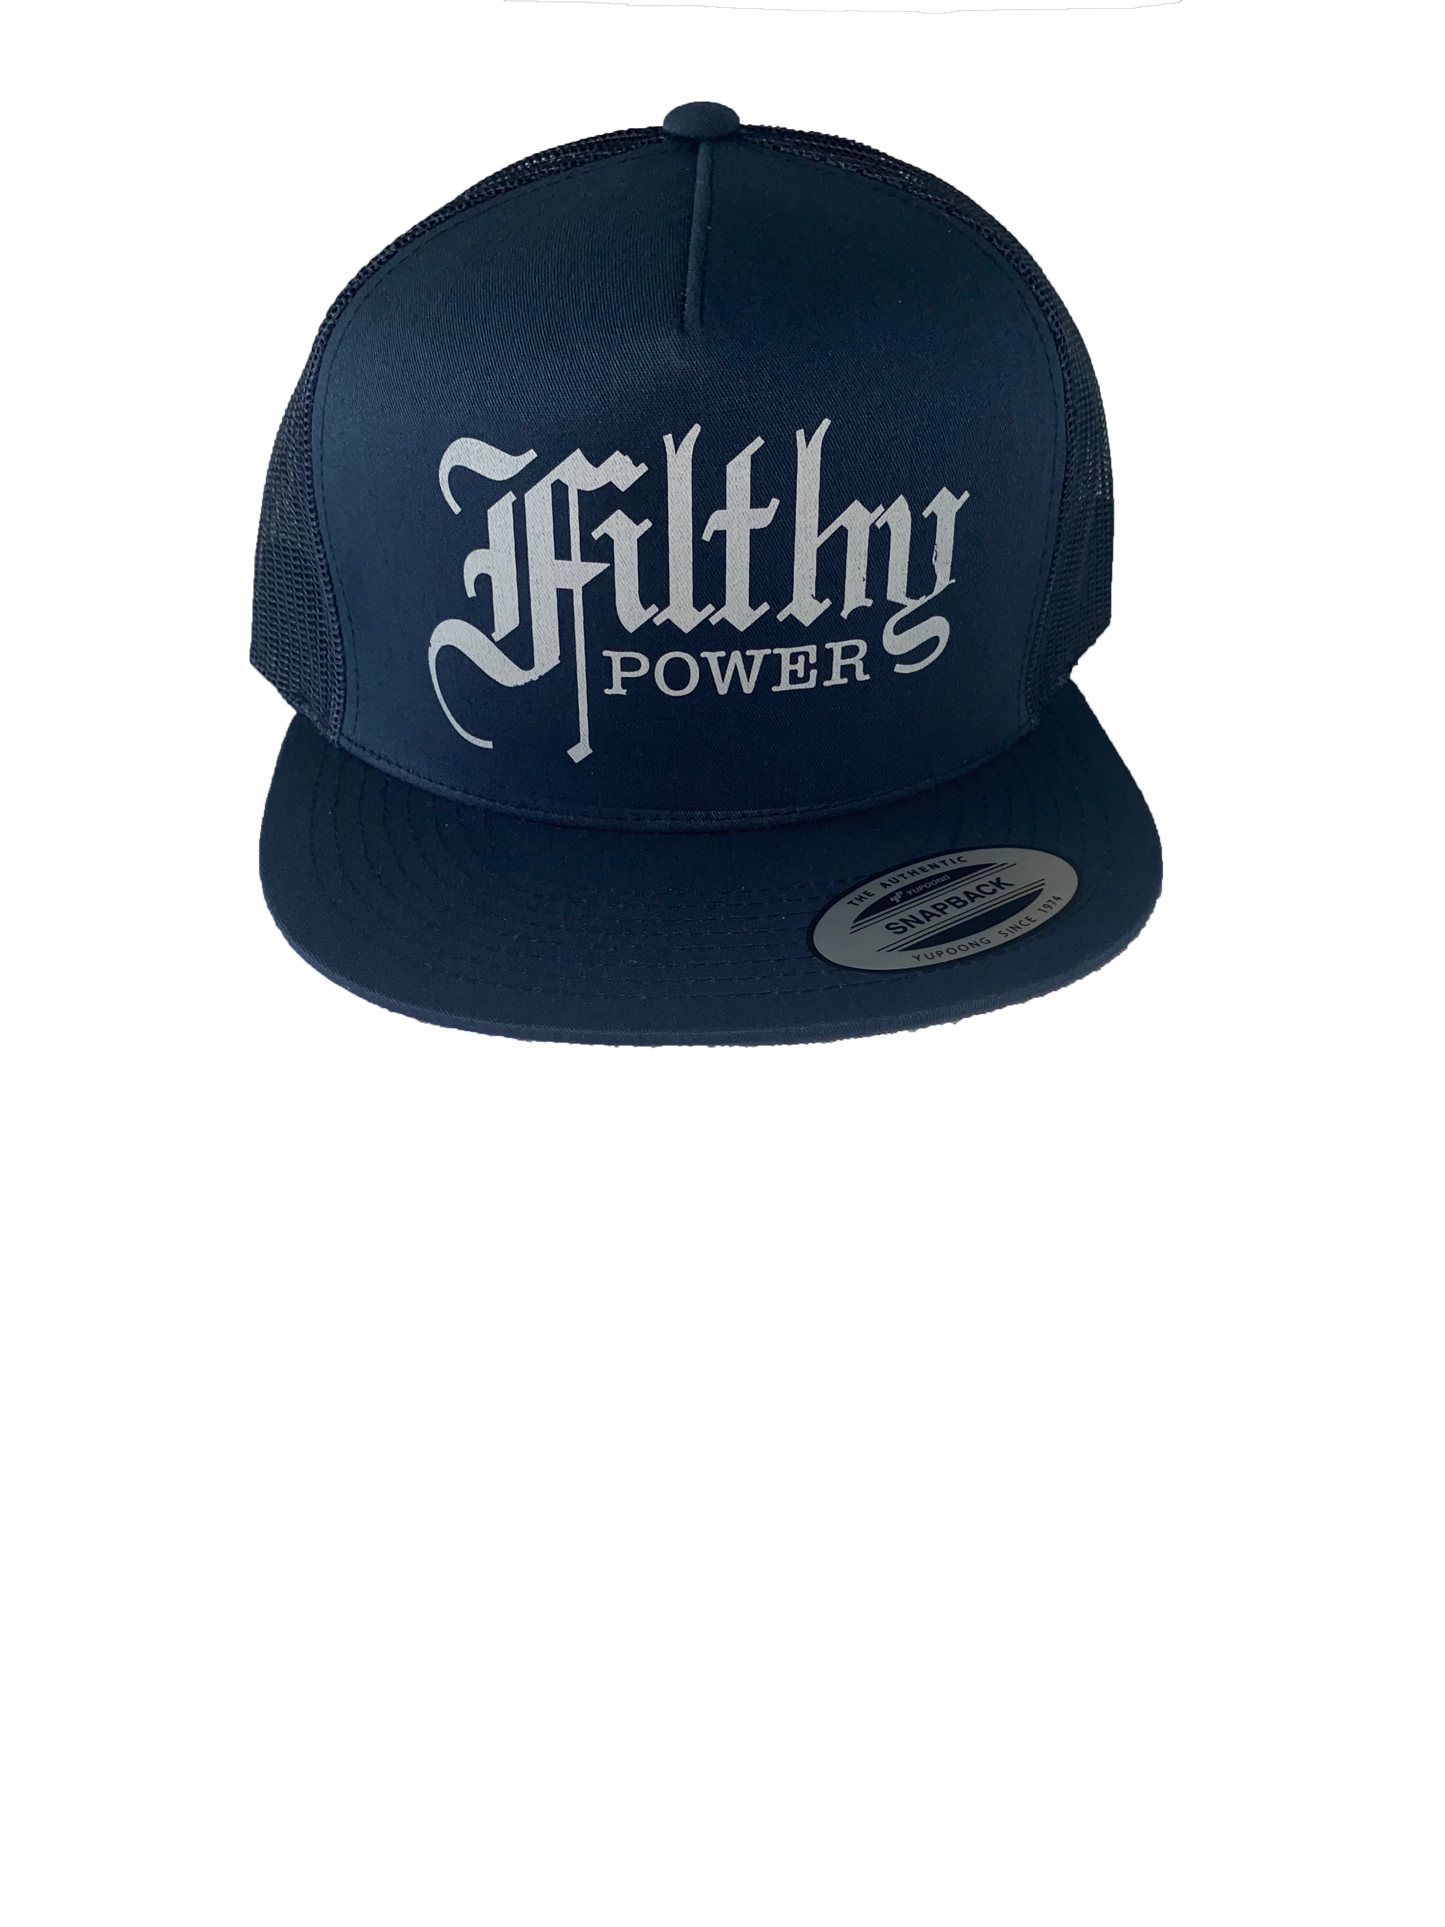 Navy Filthy Power Snap Back